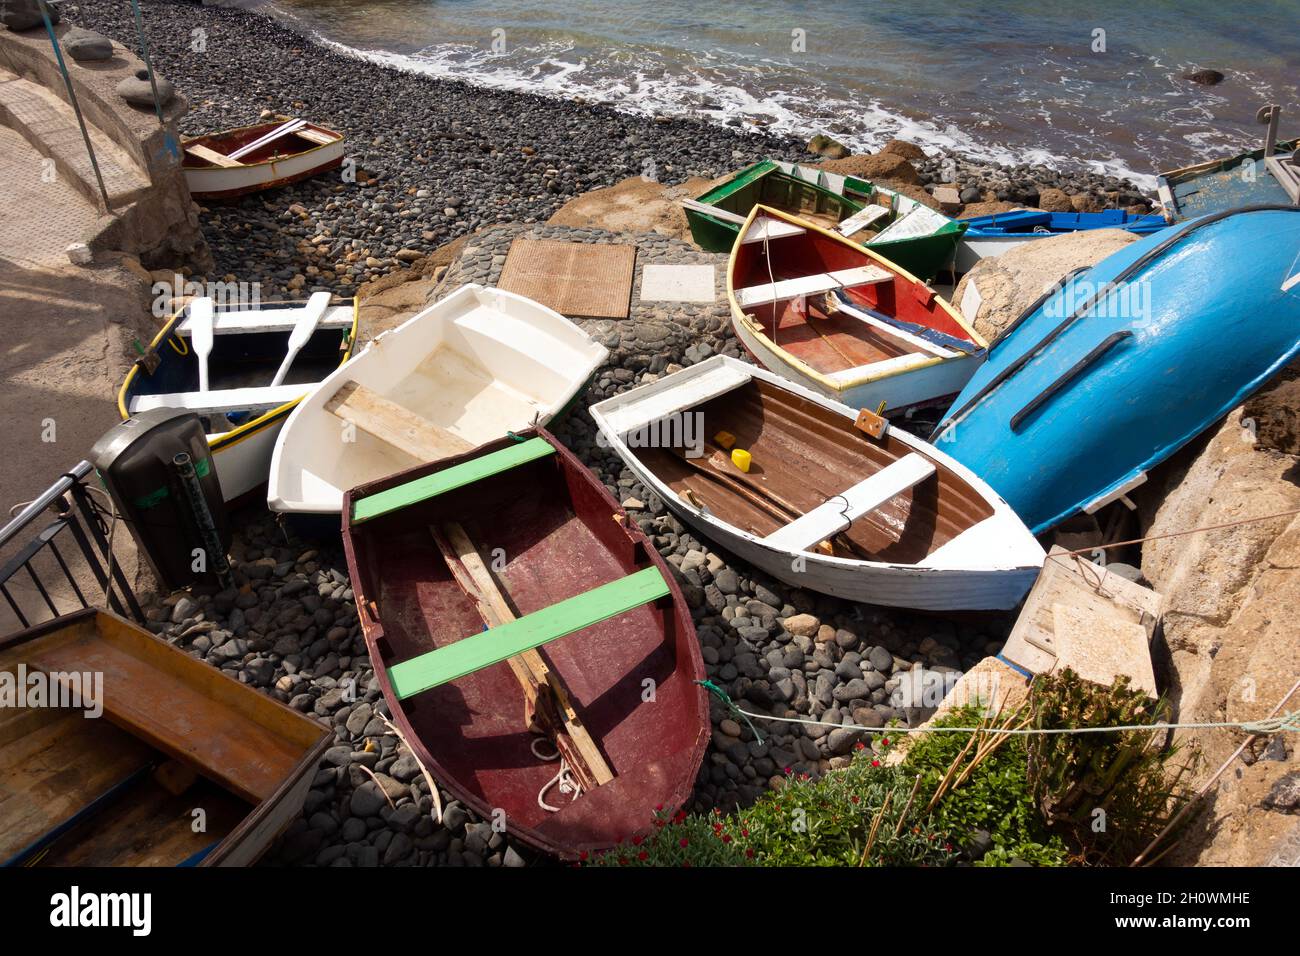 various small boats on a beach Stock Photo